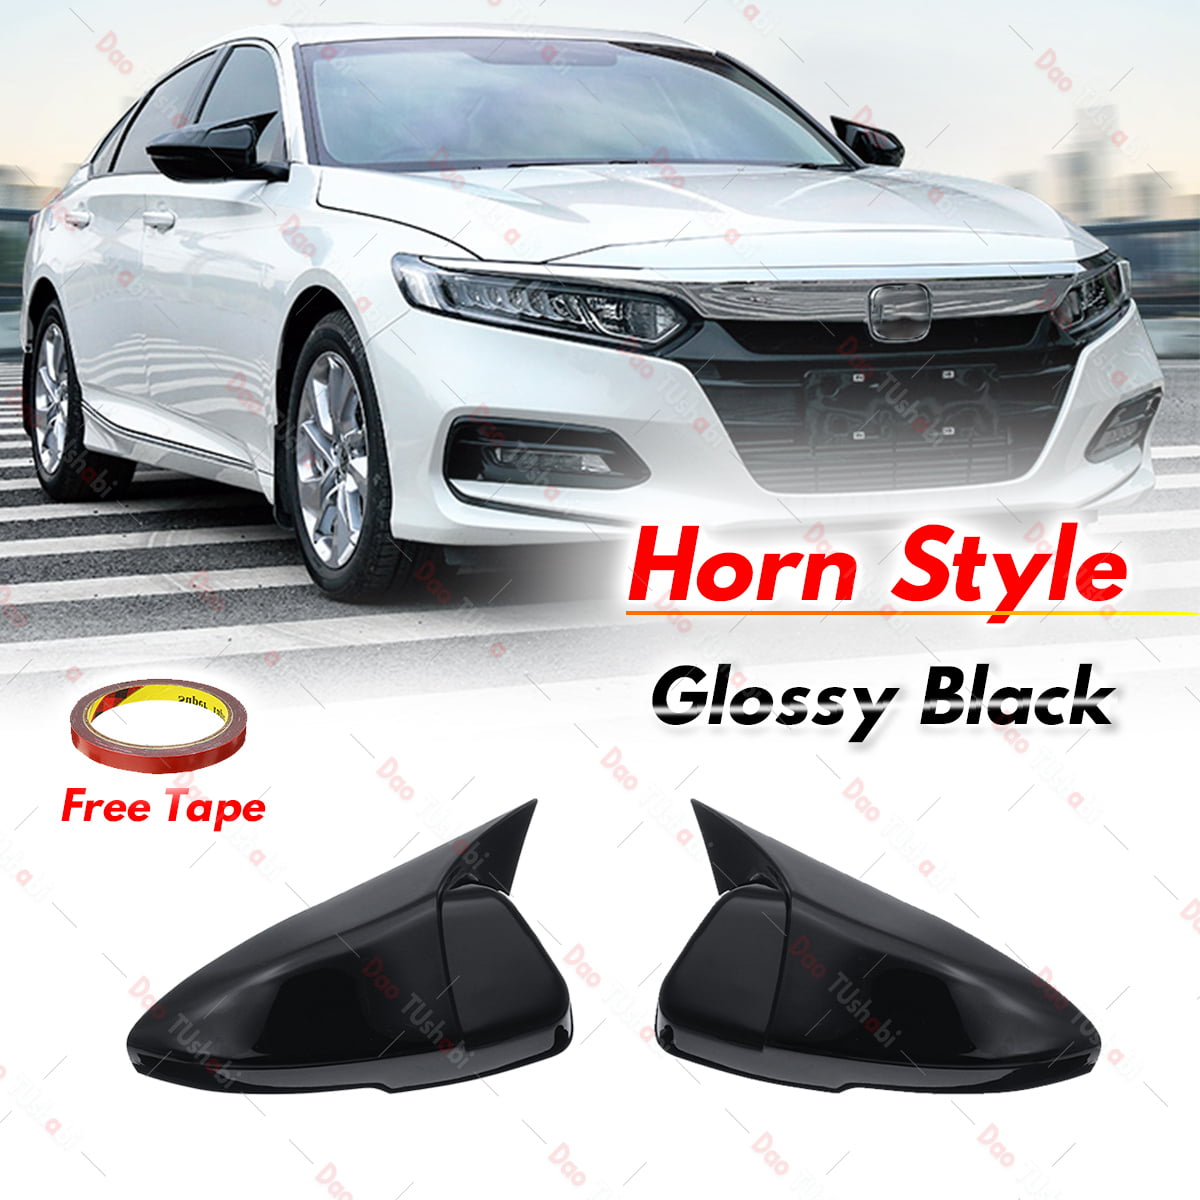 For Honda Accord 2018 2019 Chrome Rearview Mirror Strip Cover Trim Accessories 